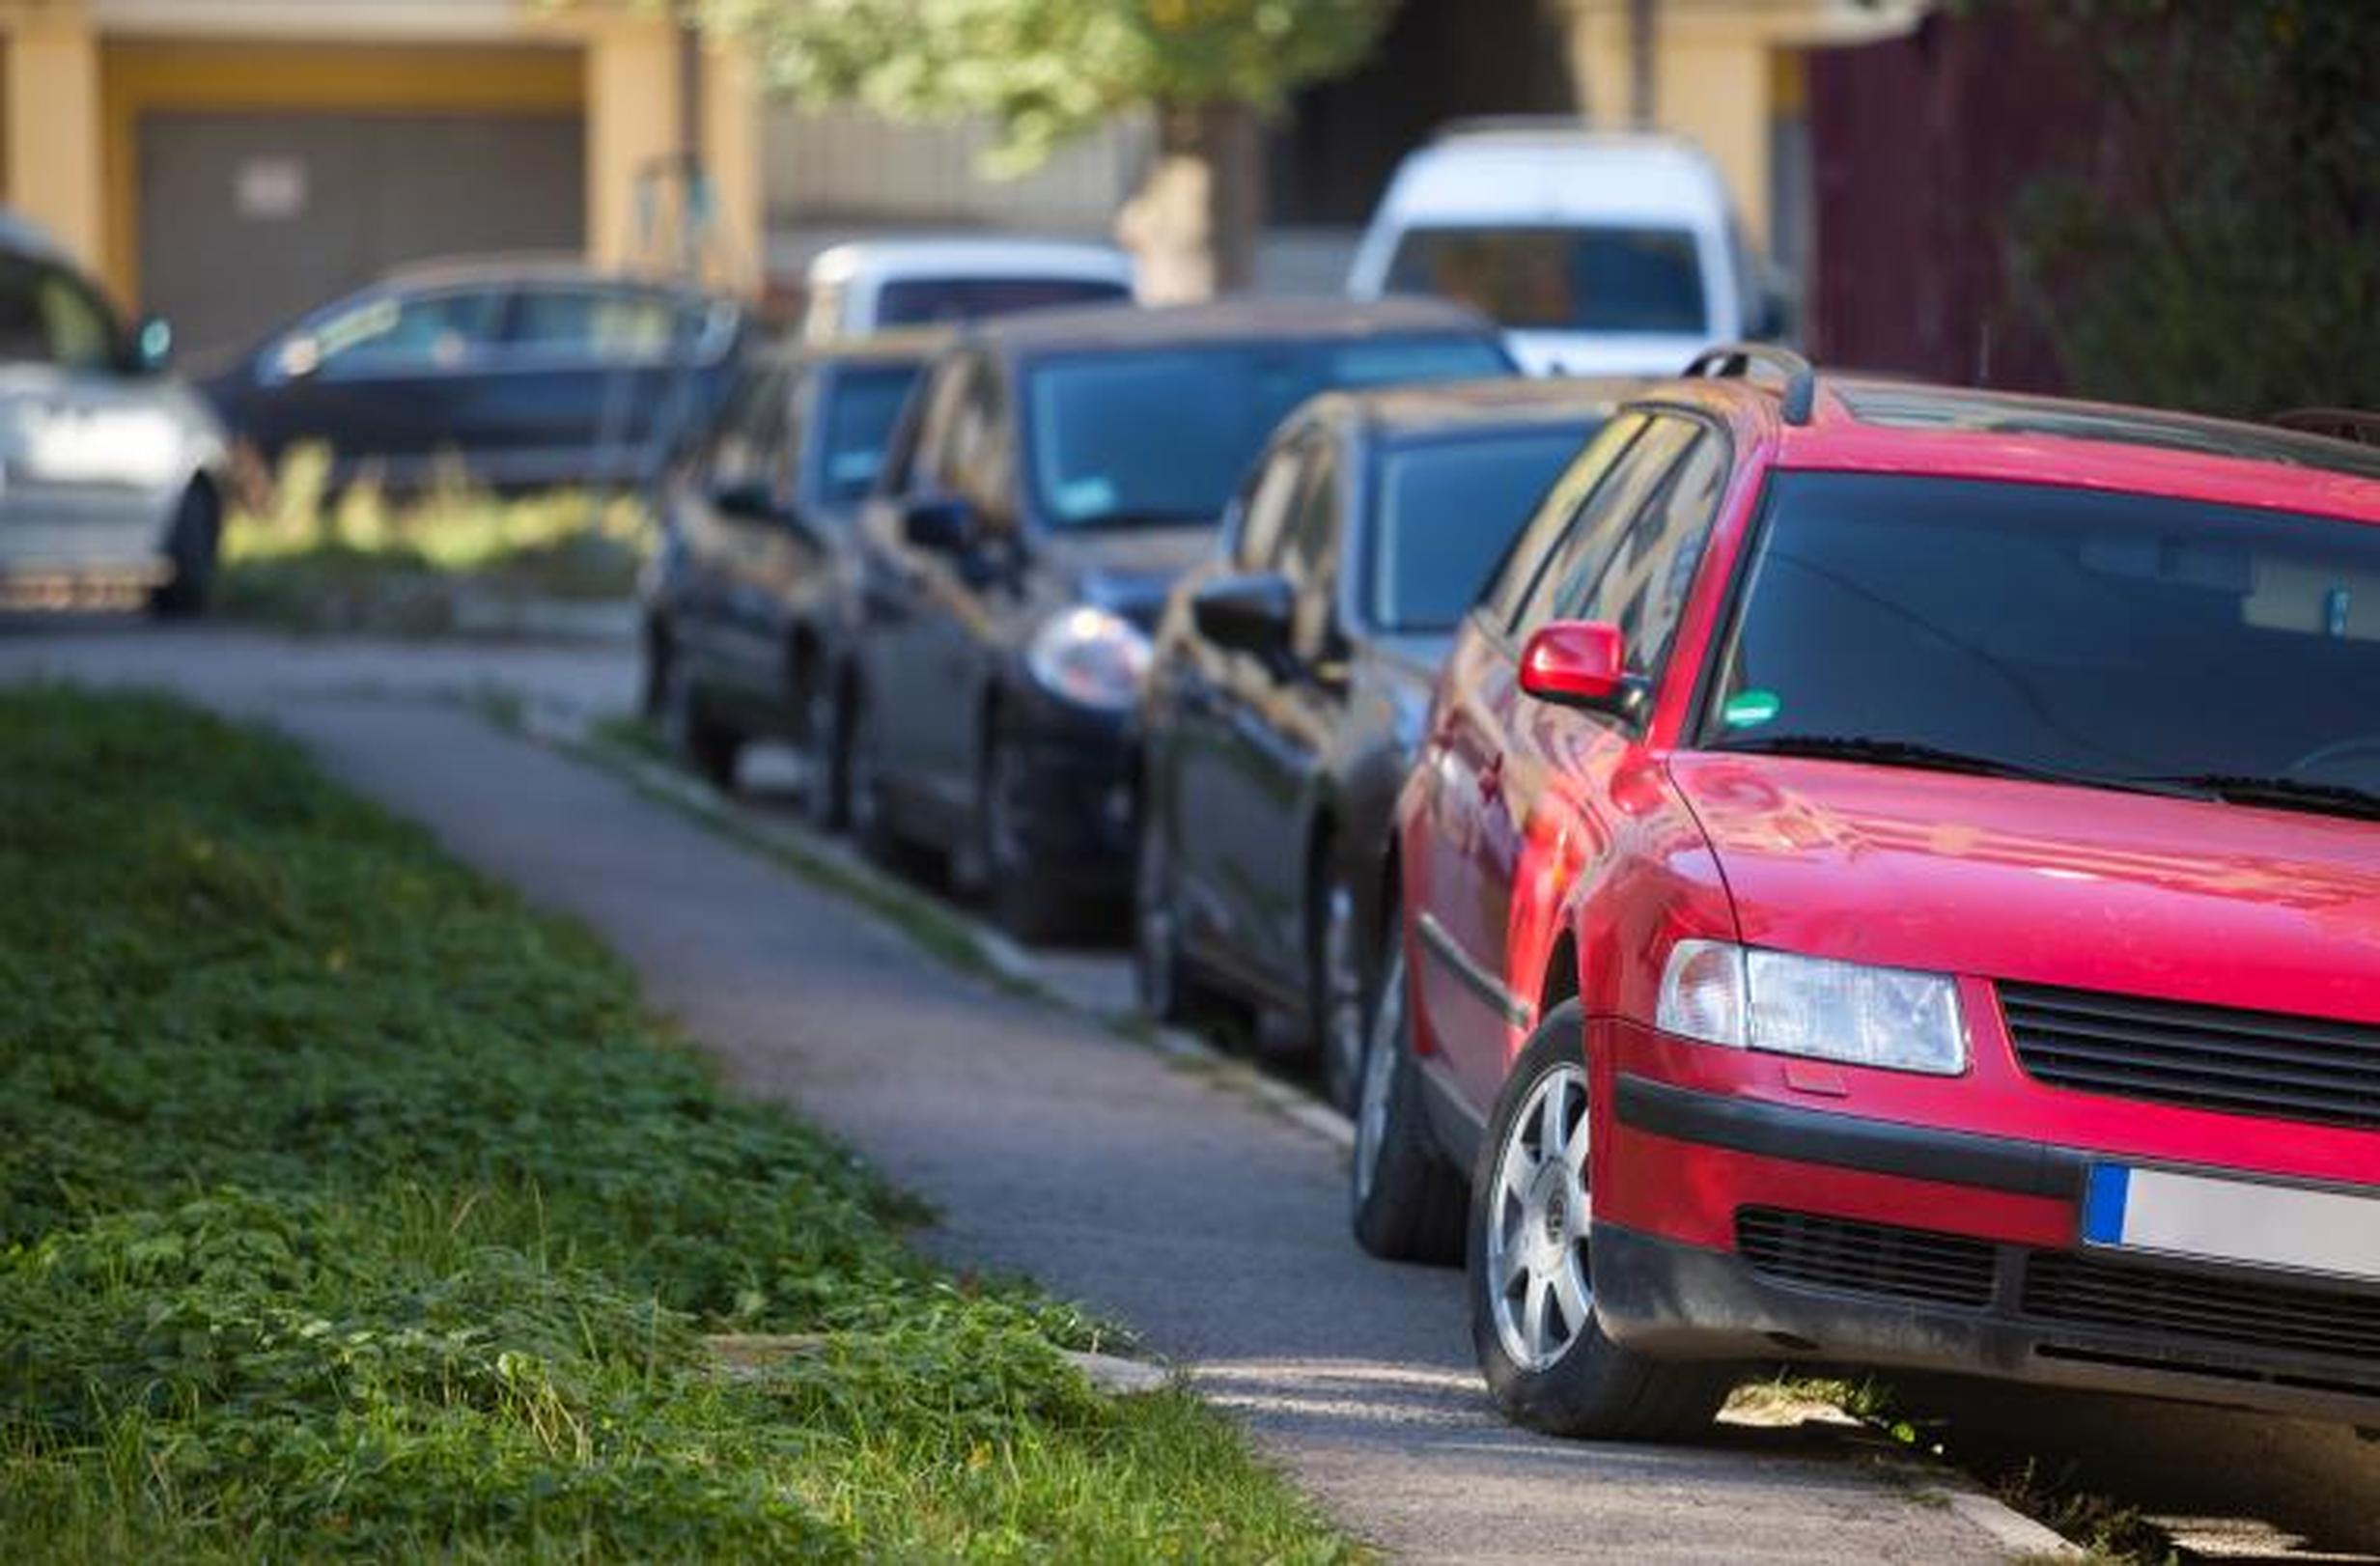 Pavement parking: Government needs to step up